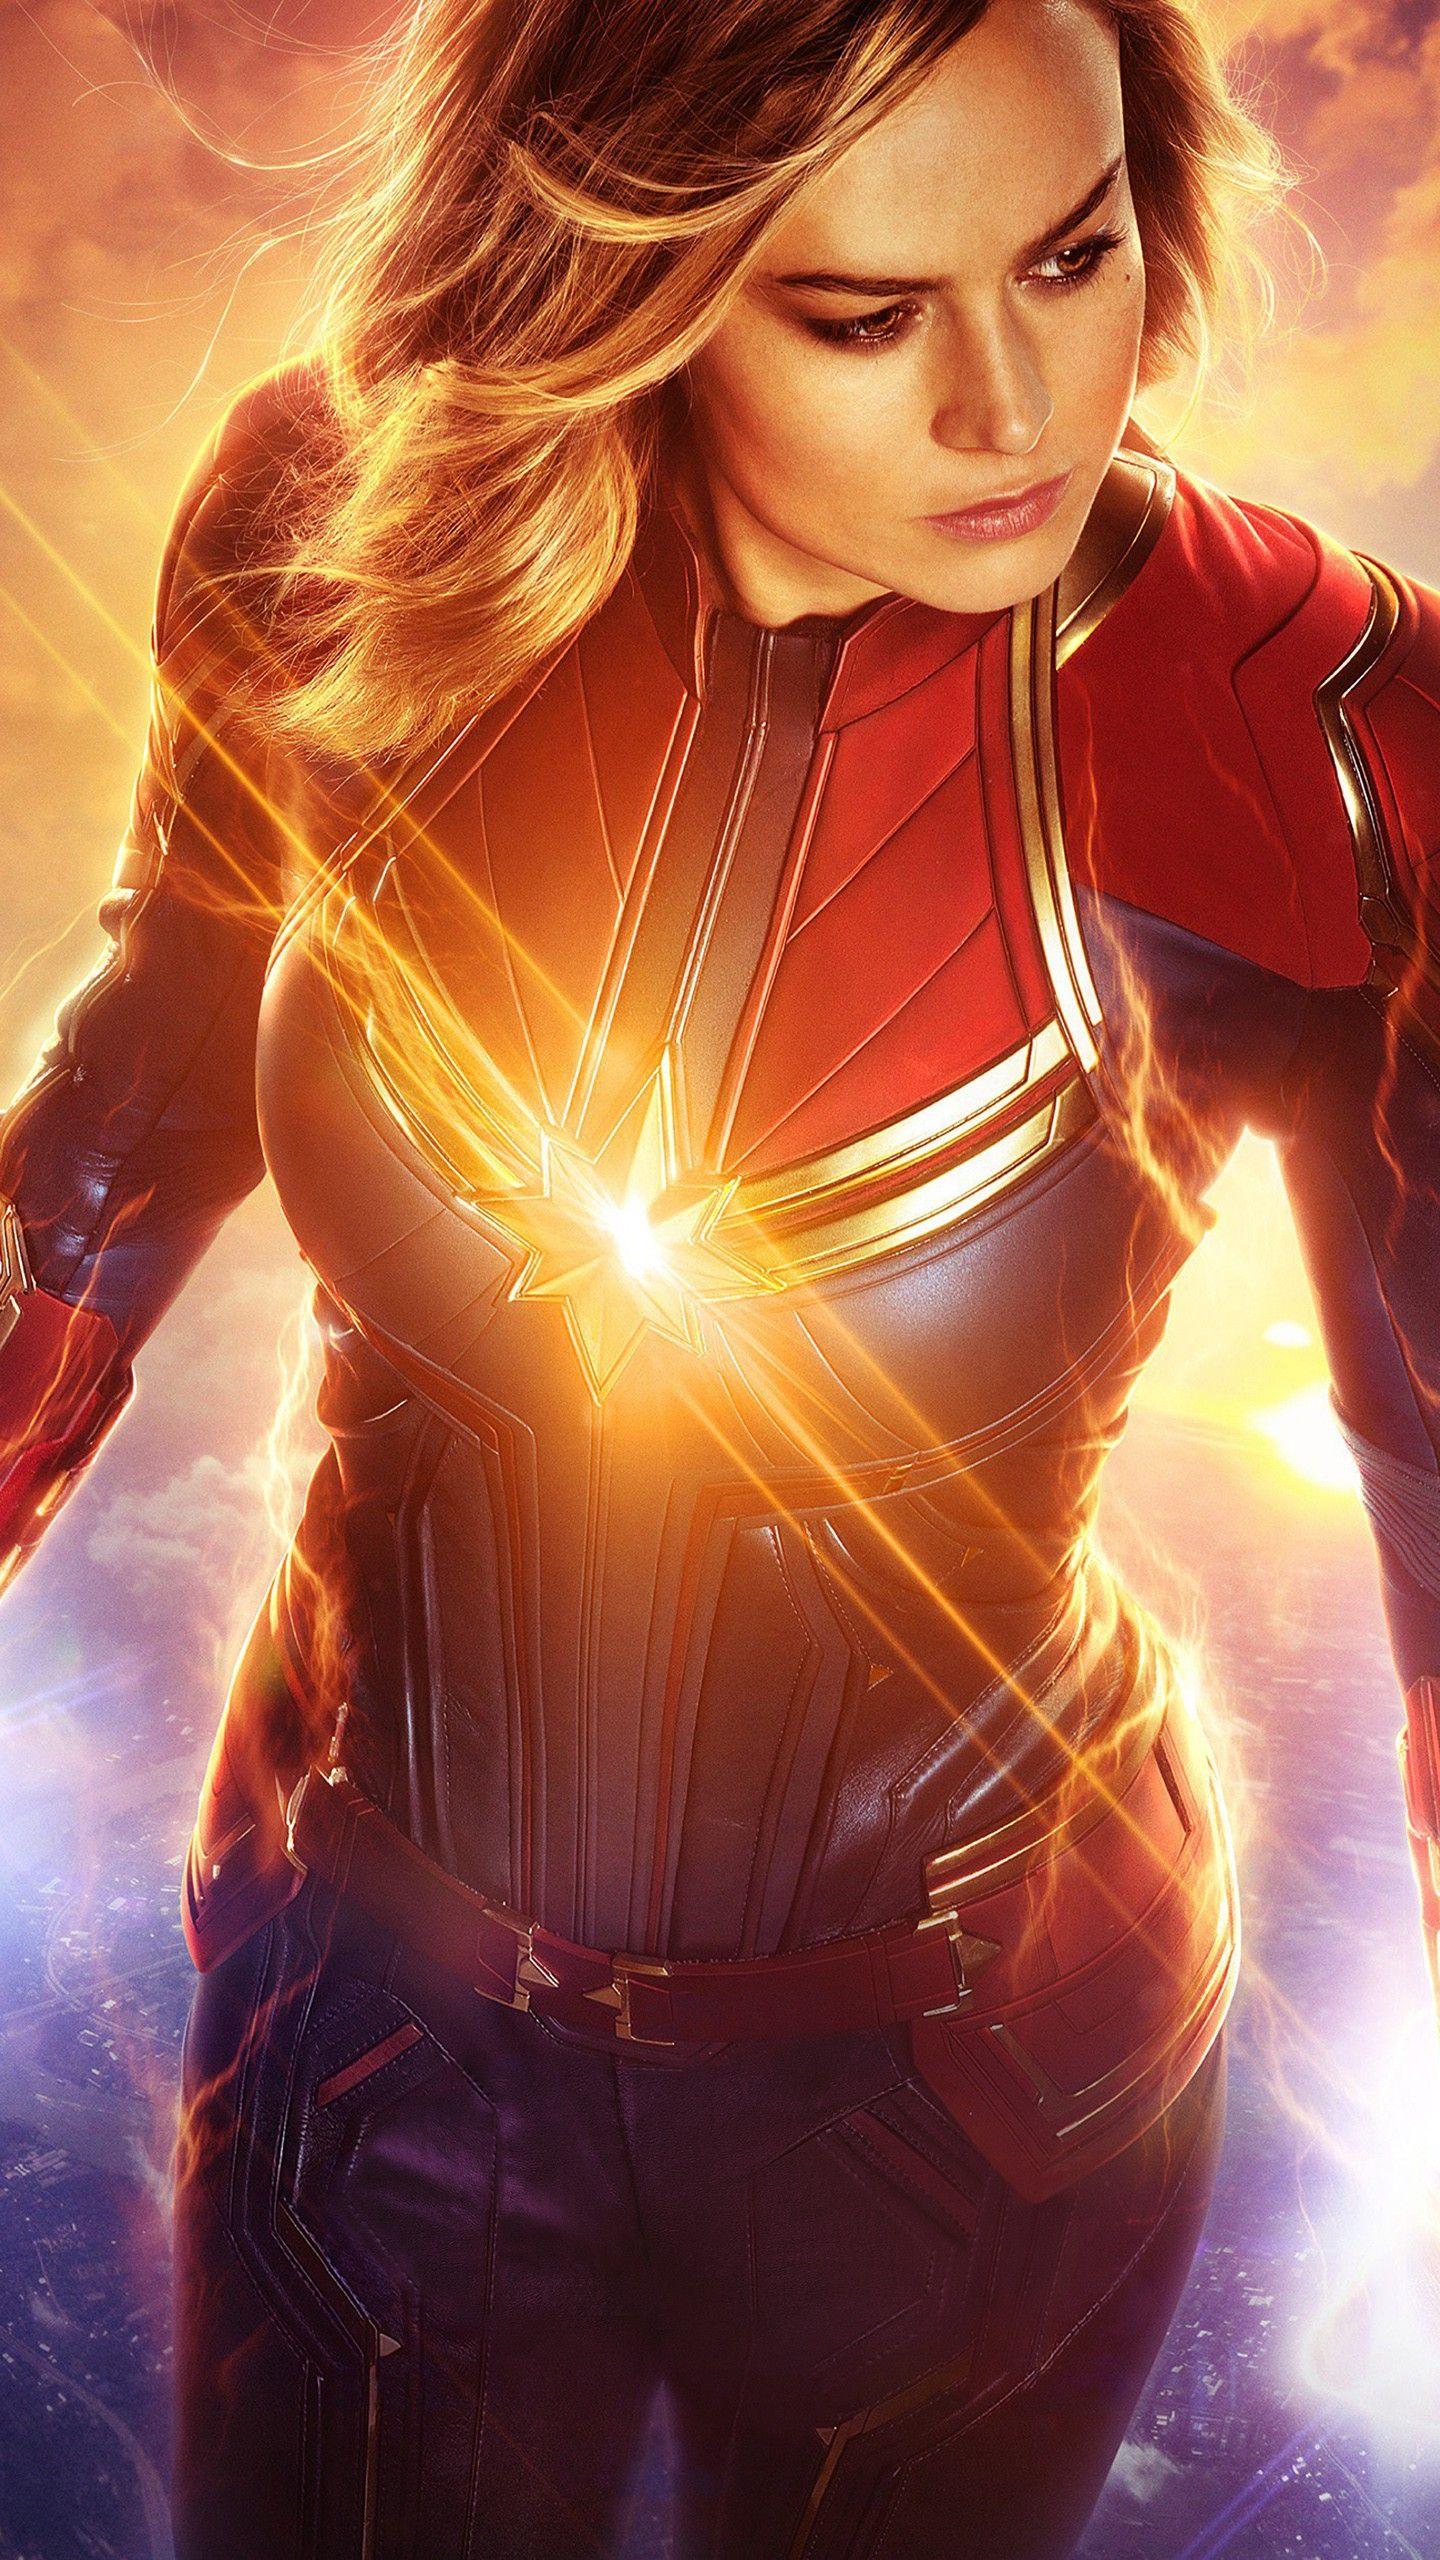 Captain Marvel Iphone Wallpapers Top Free Captain Marvel Iphone Backgrounds Wallpaperaccess